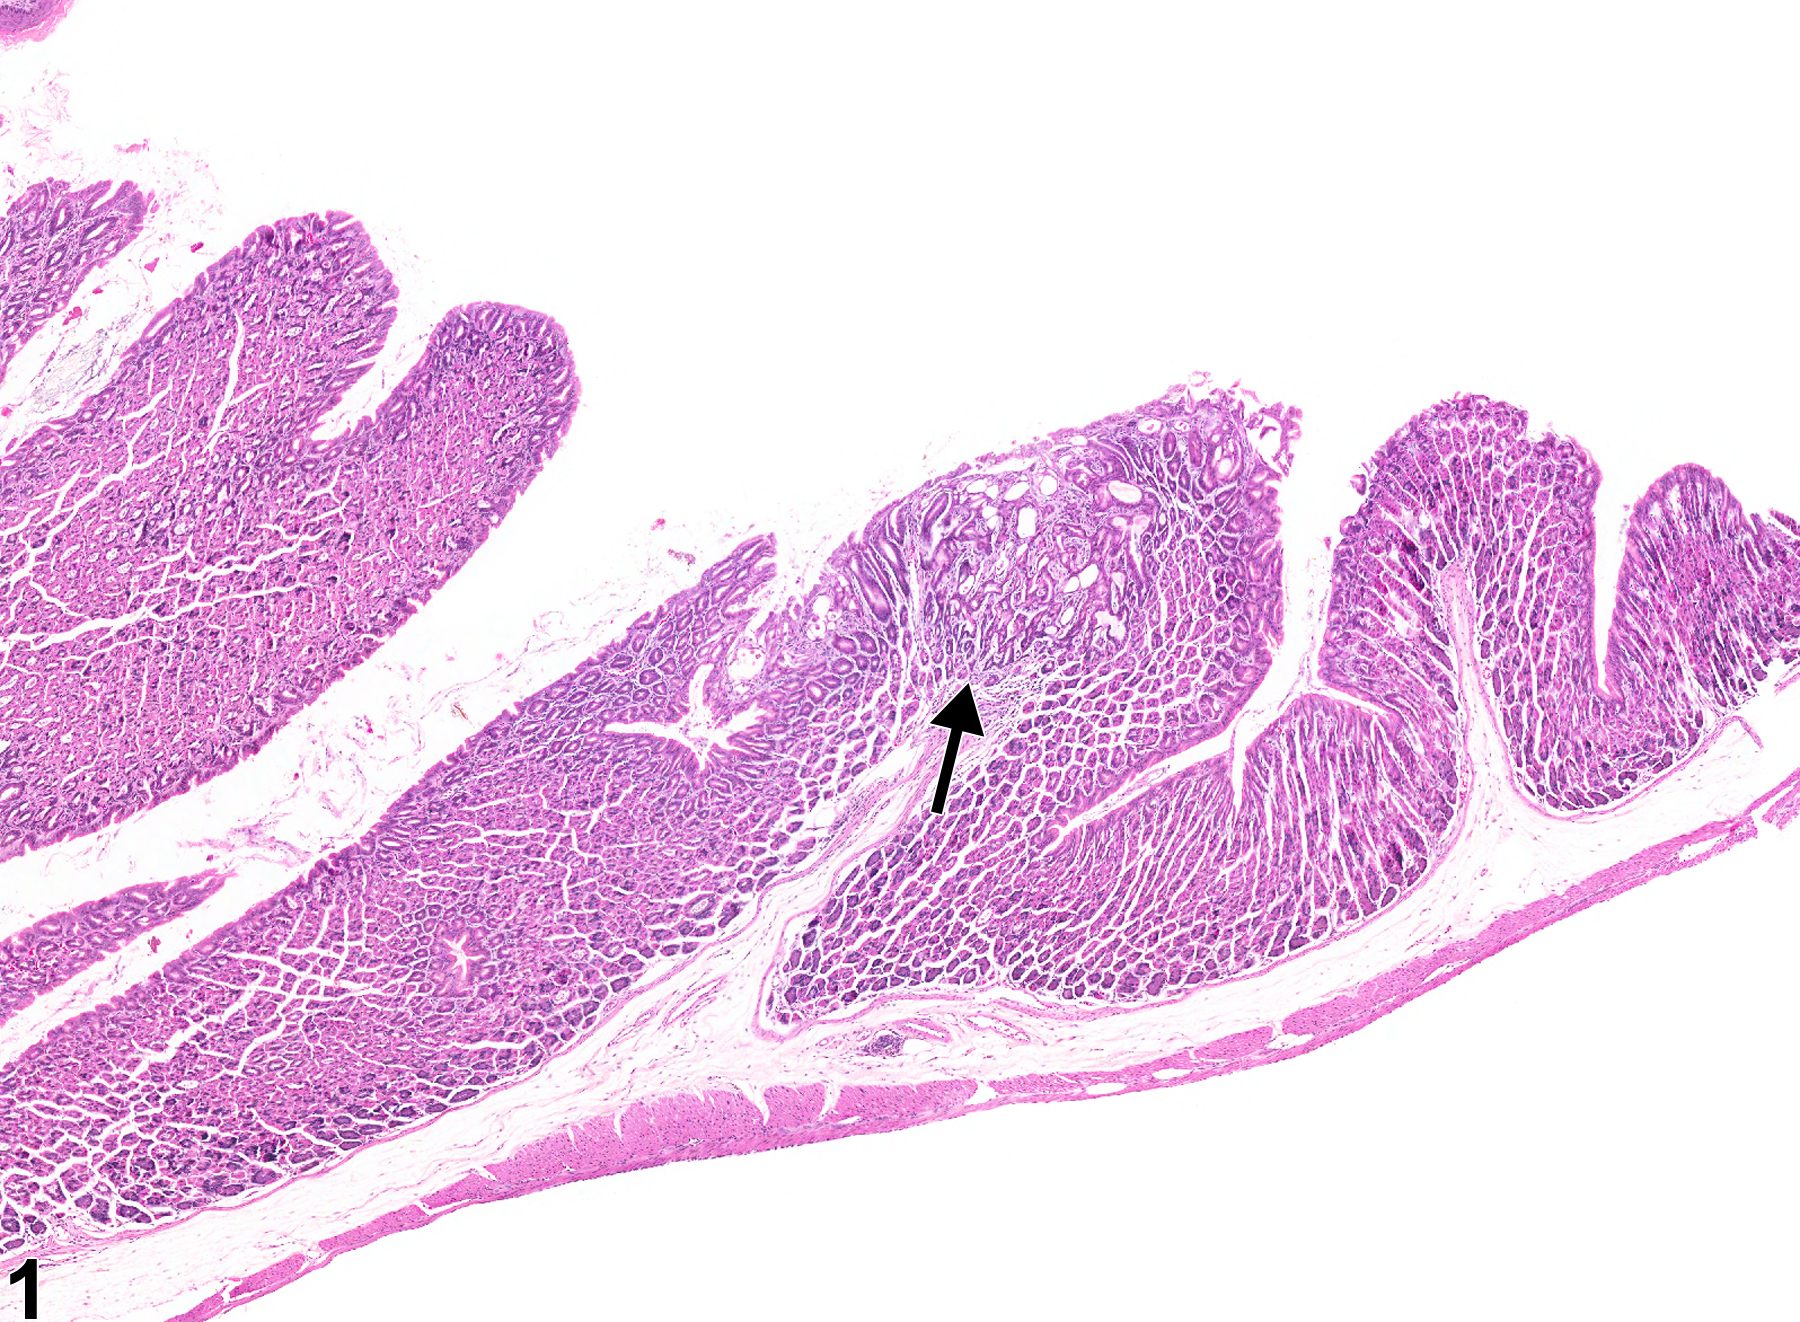 Image of hyperplasia, atypical in the glandular stomach epithelium from a female B6C3F1 mouse in a chronic study